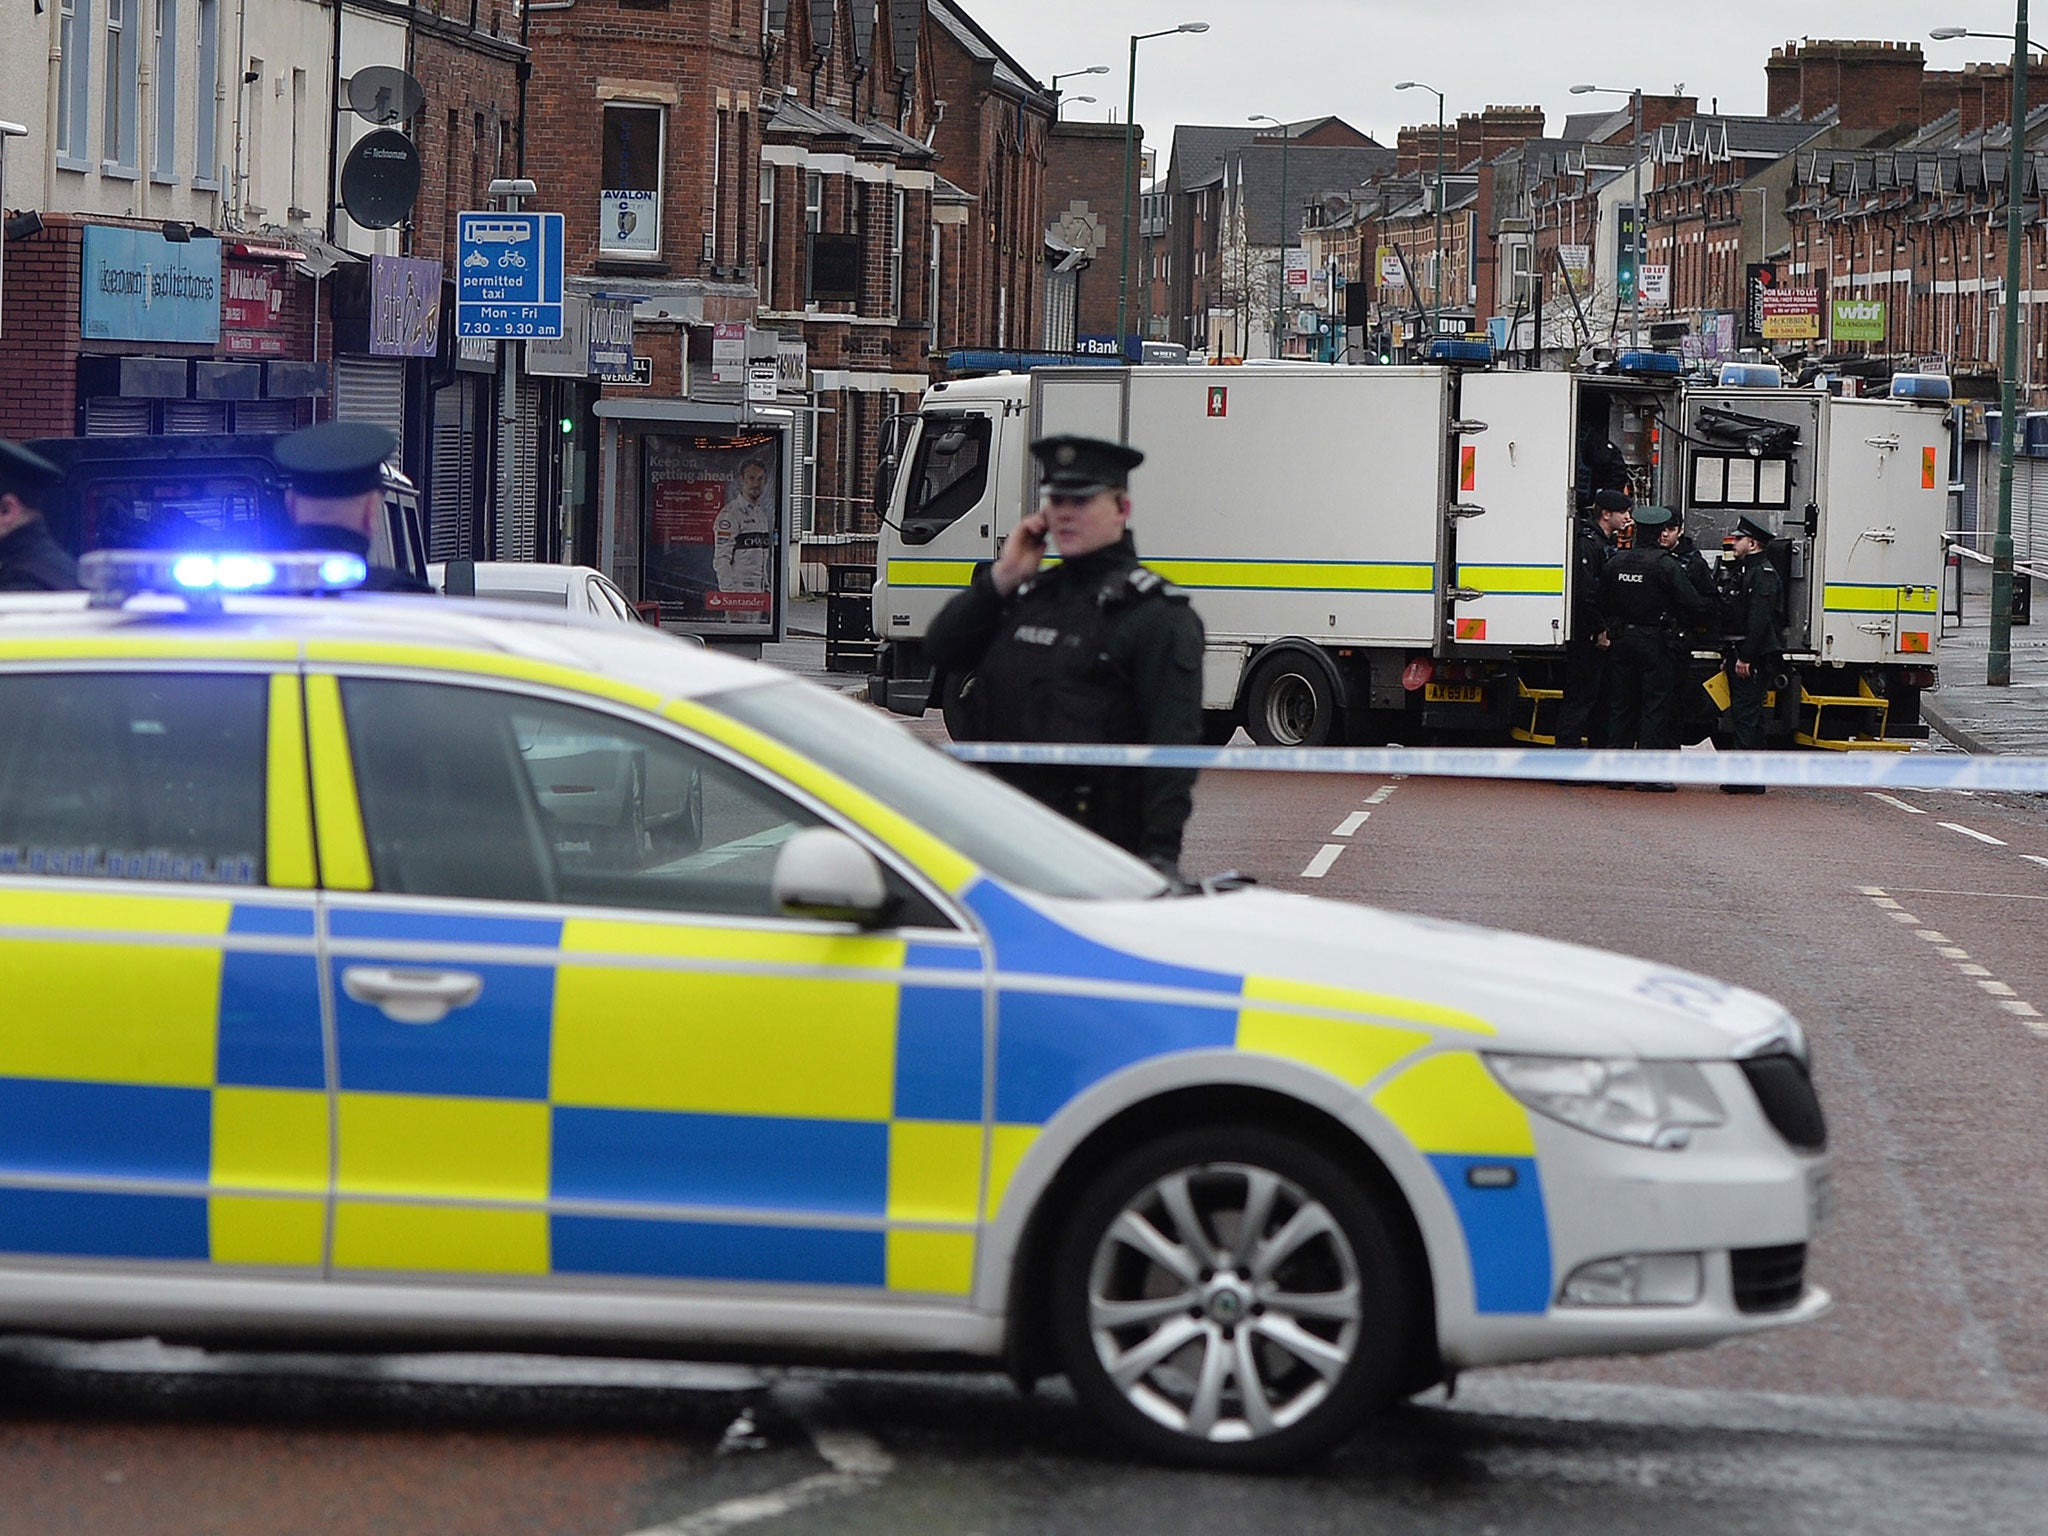 PSNI officers on Hillsborough Drive in Belfast - Sunday's discovery came just over 24 hours after a prison officer was badly injured when a dissident republican car bomb detonated under his van in Belfast